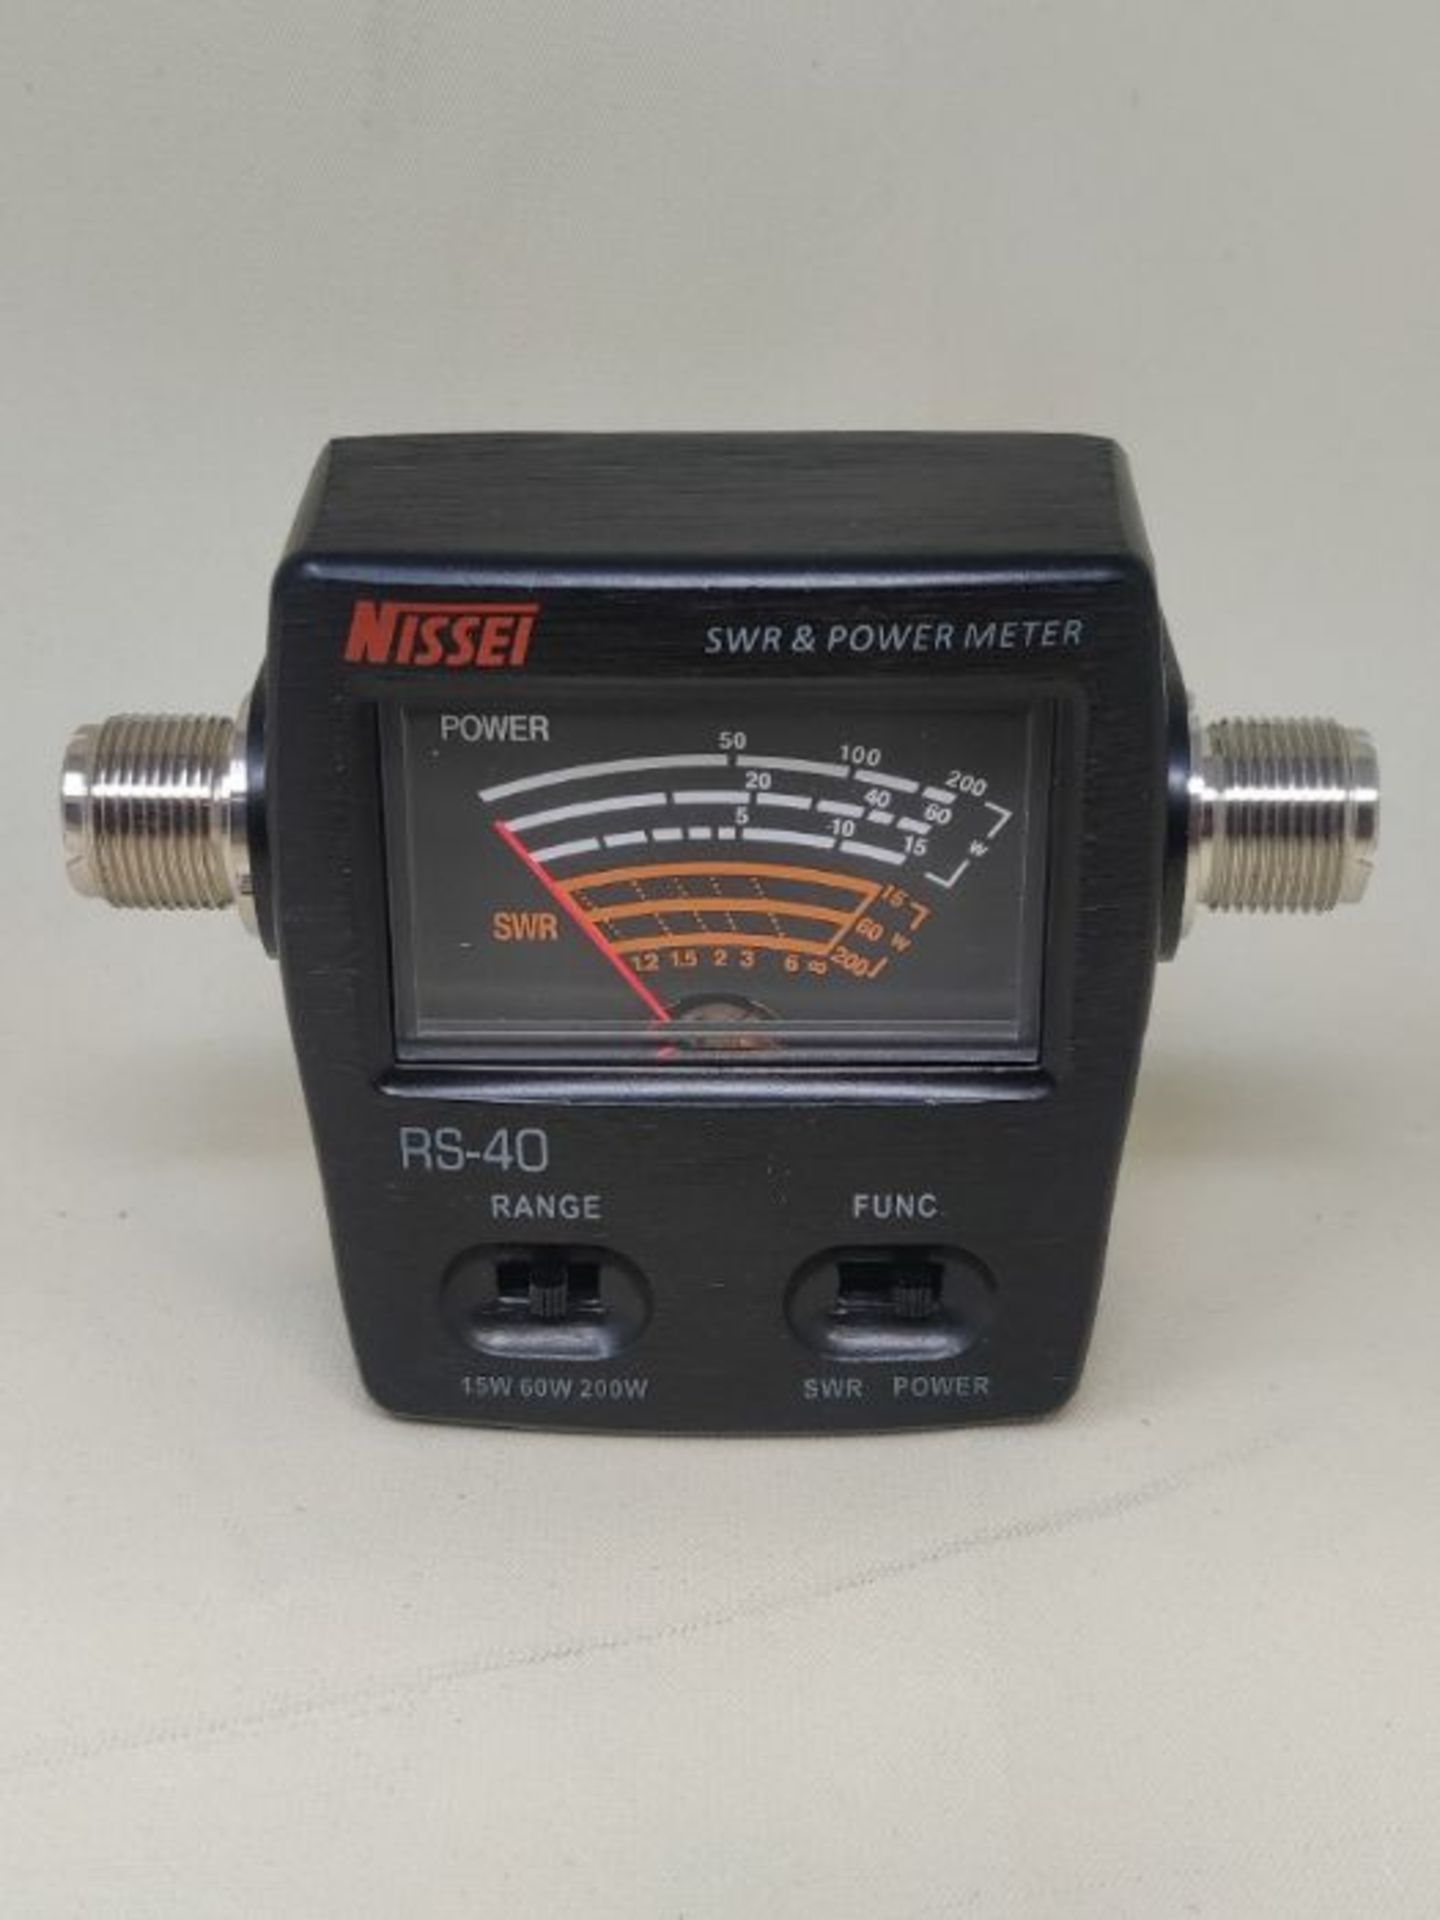 Professional UV Dual Band Standing-Wave Meter Power Meter SWR/Power Meter, Highly Accu - Image 2 of 4